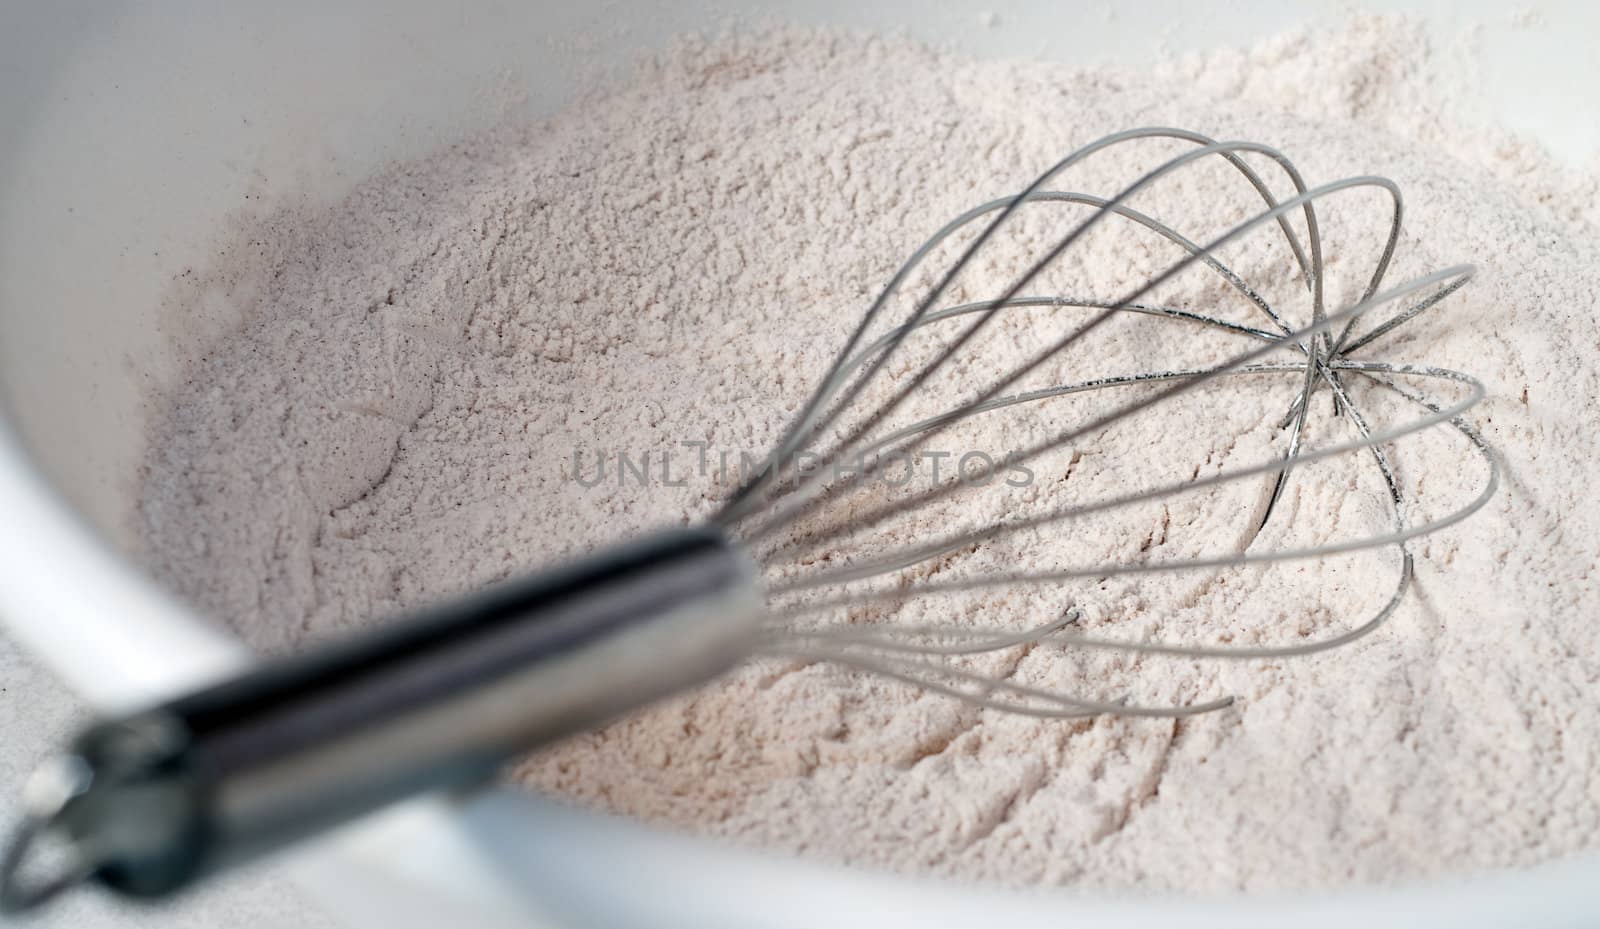 Dried muffin mix with a whisk about to mix it up